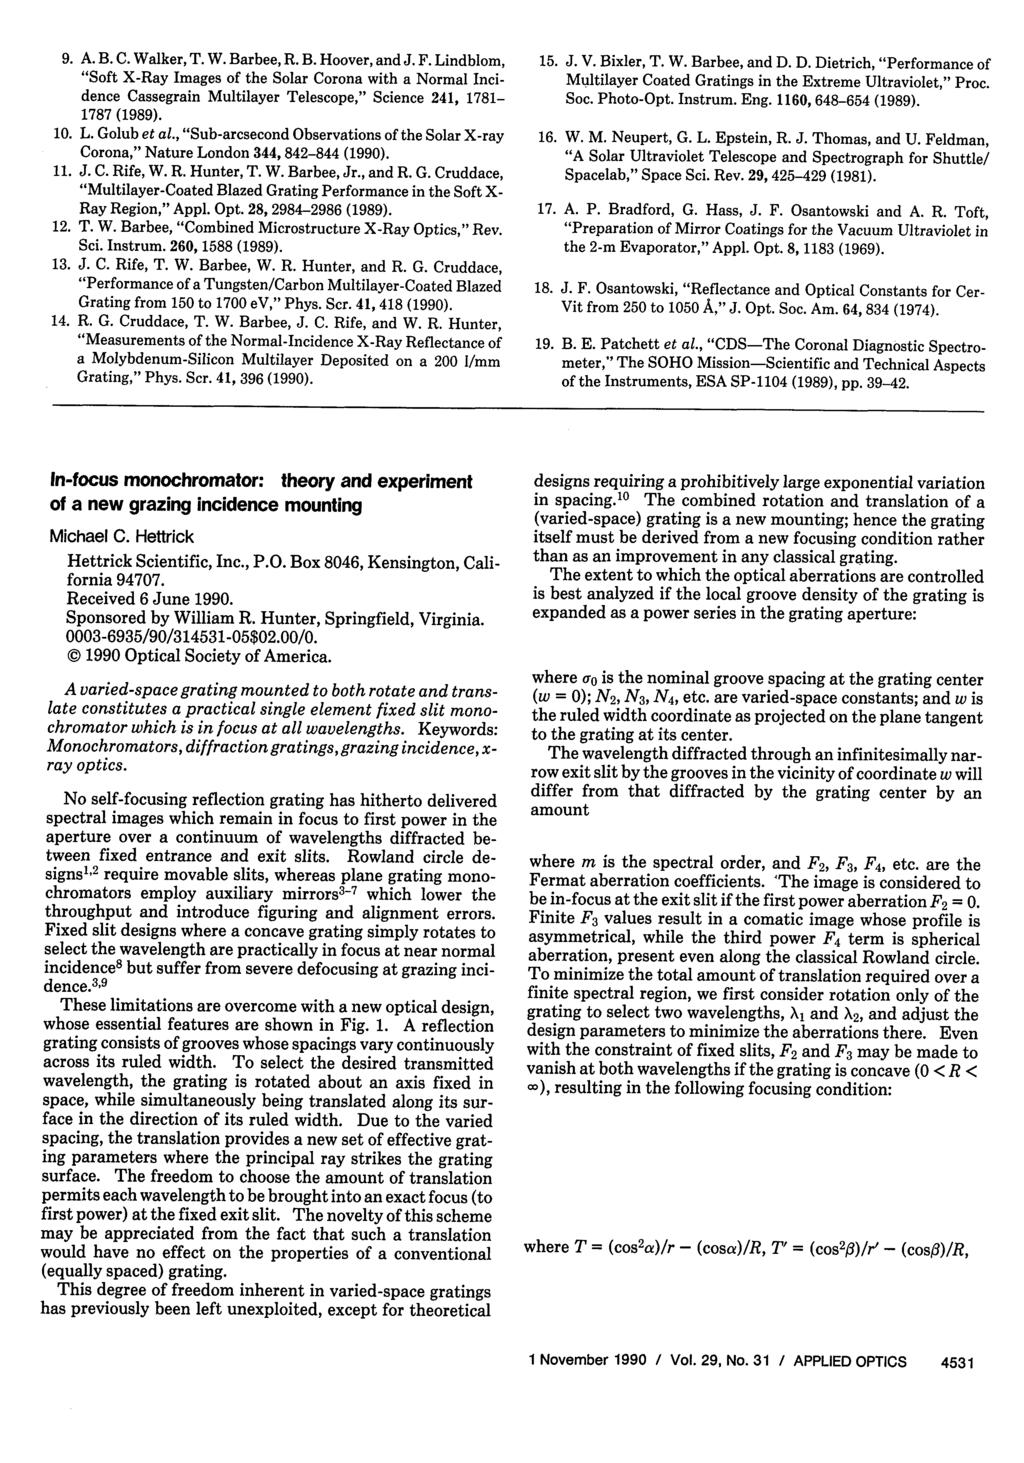 In-focus monochromator: theory and experiment of a new grazing incidence mounting Michael C. Hettrick Hettrick Scientific, Inc., P.O. Box 8046, Kensington, California 94707. Received 6 June 1990.